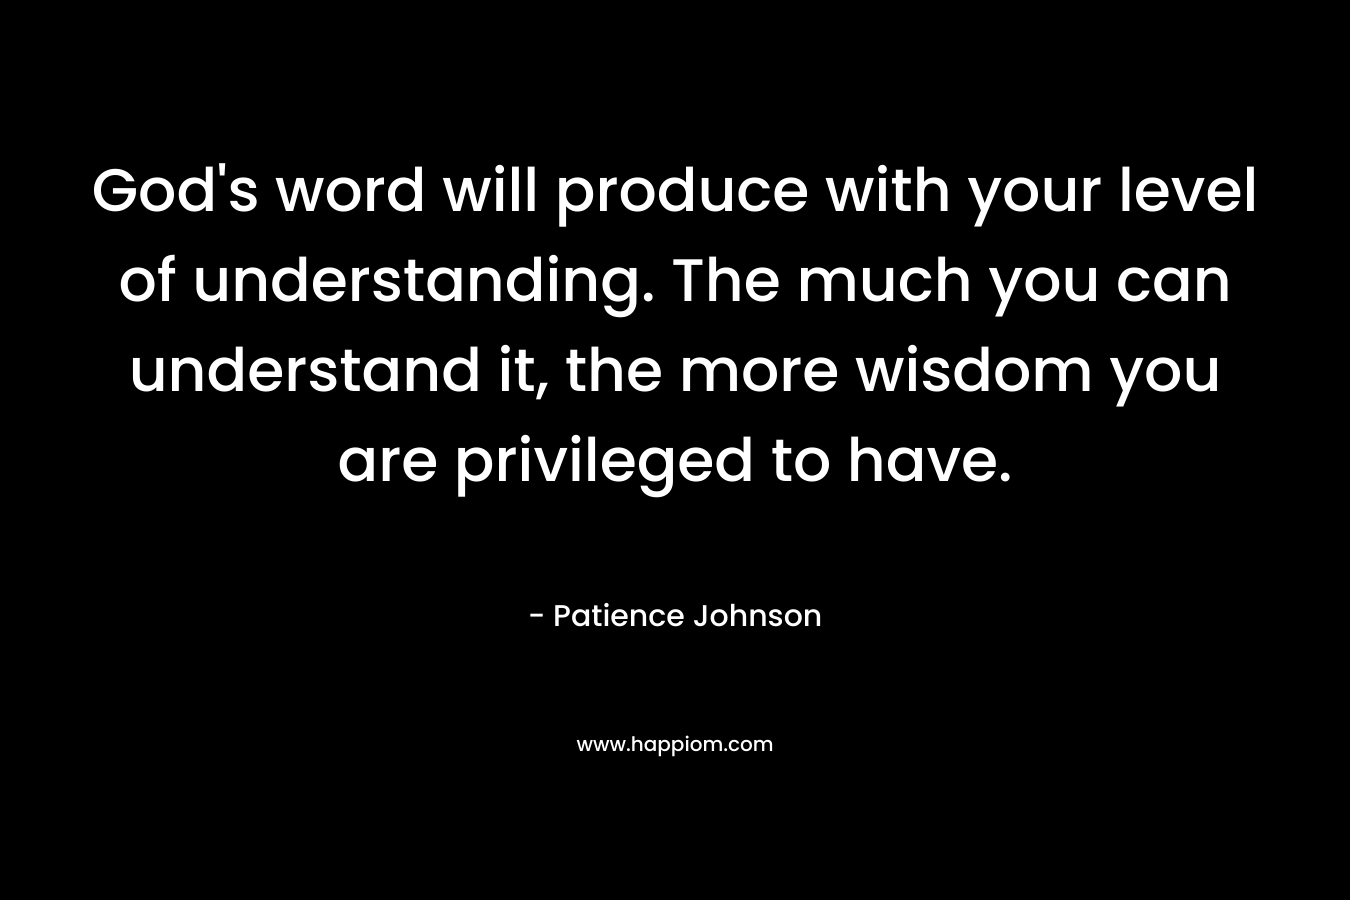 God’s word will produce with your level of understanding. The much you can understand it, the more wisdom you are privileged to have. – Patience Johnson